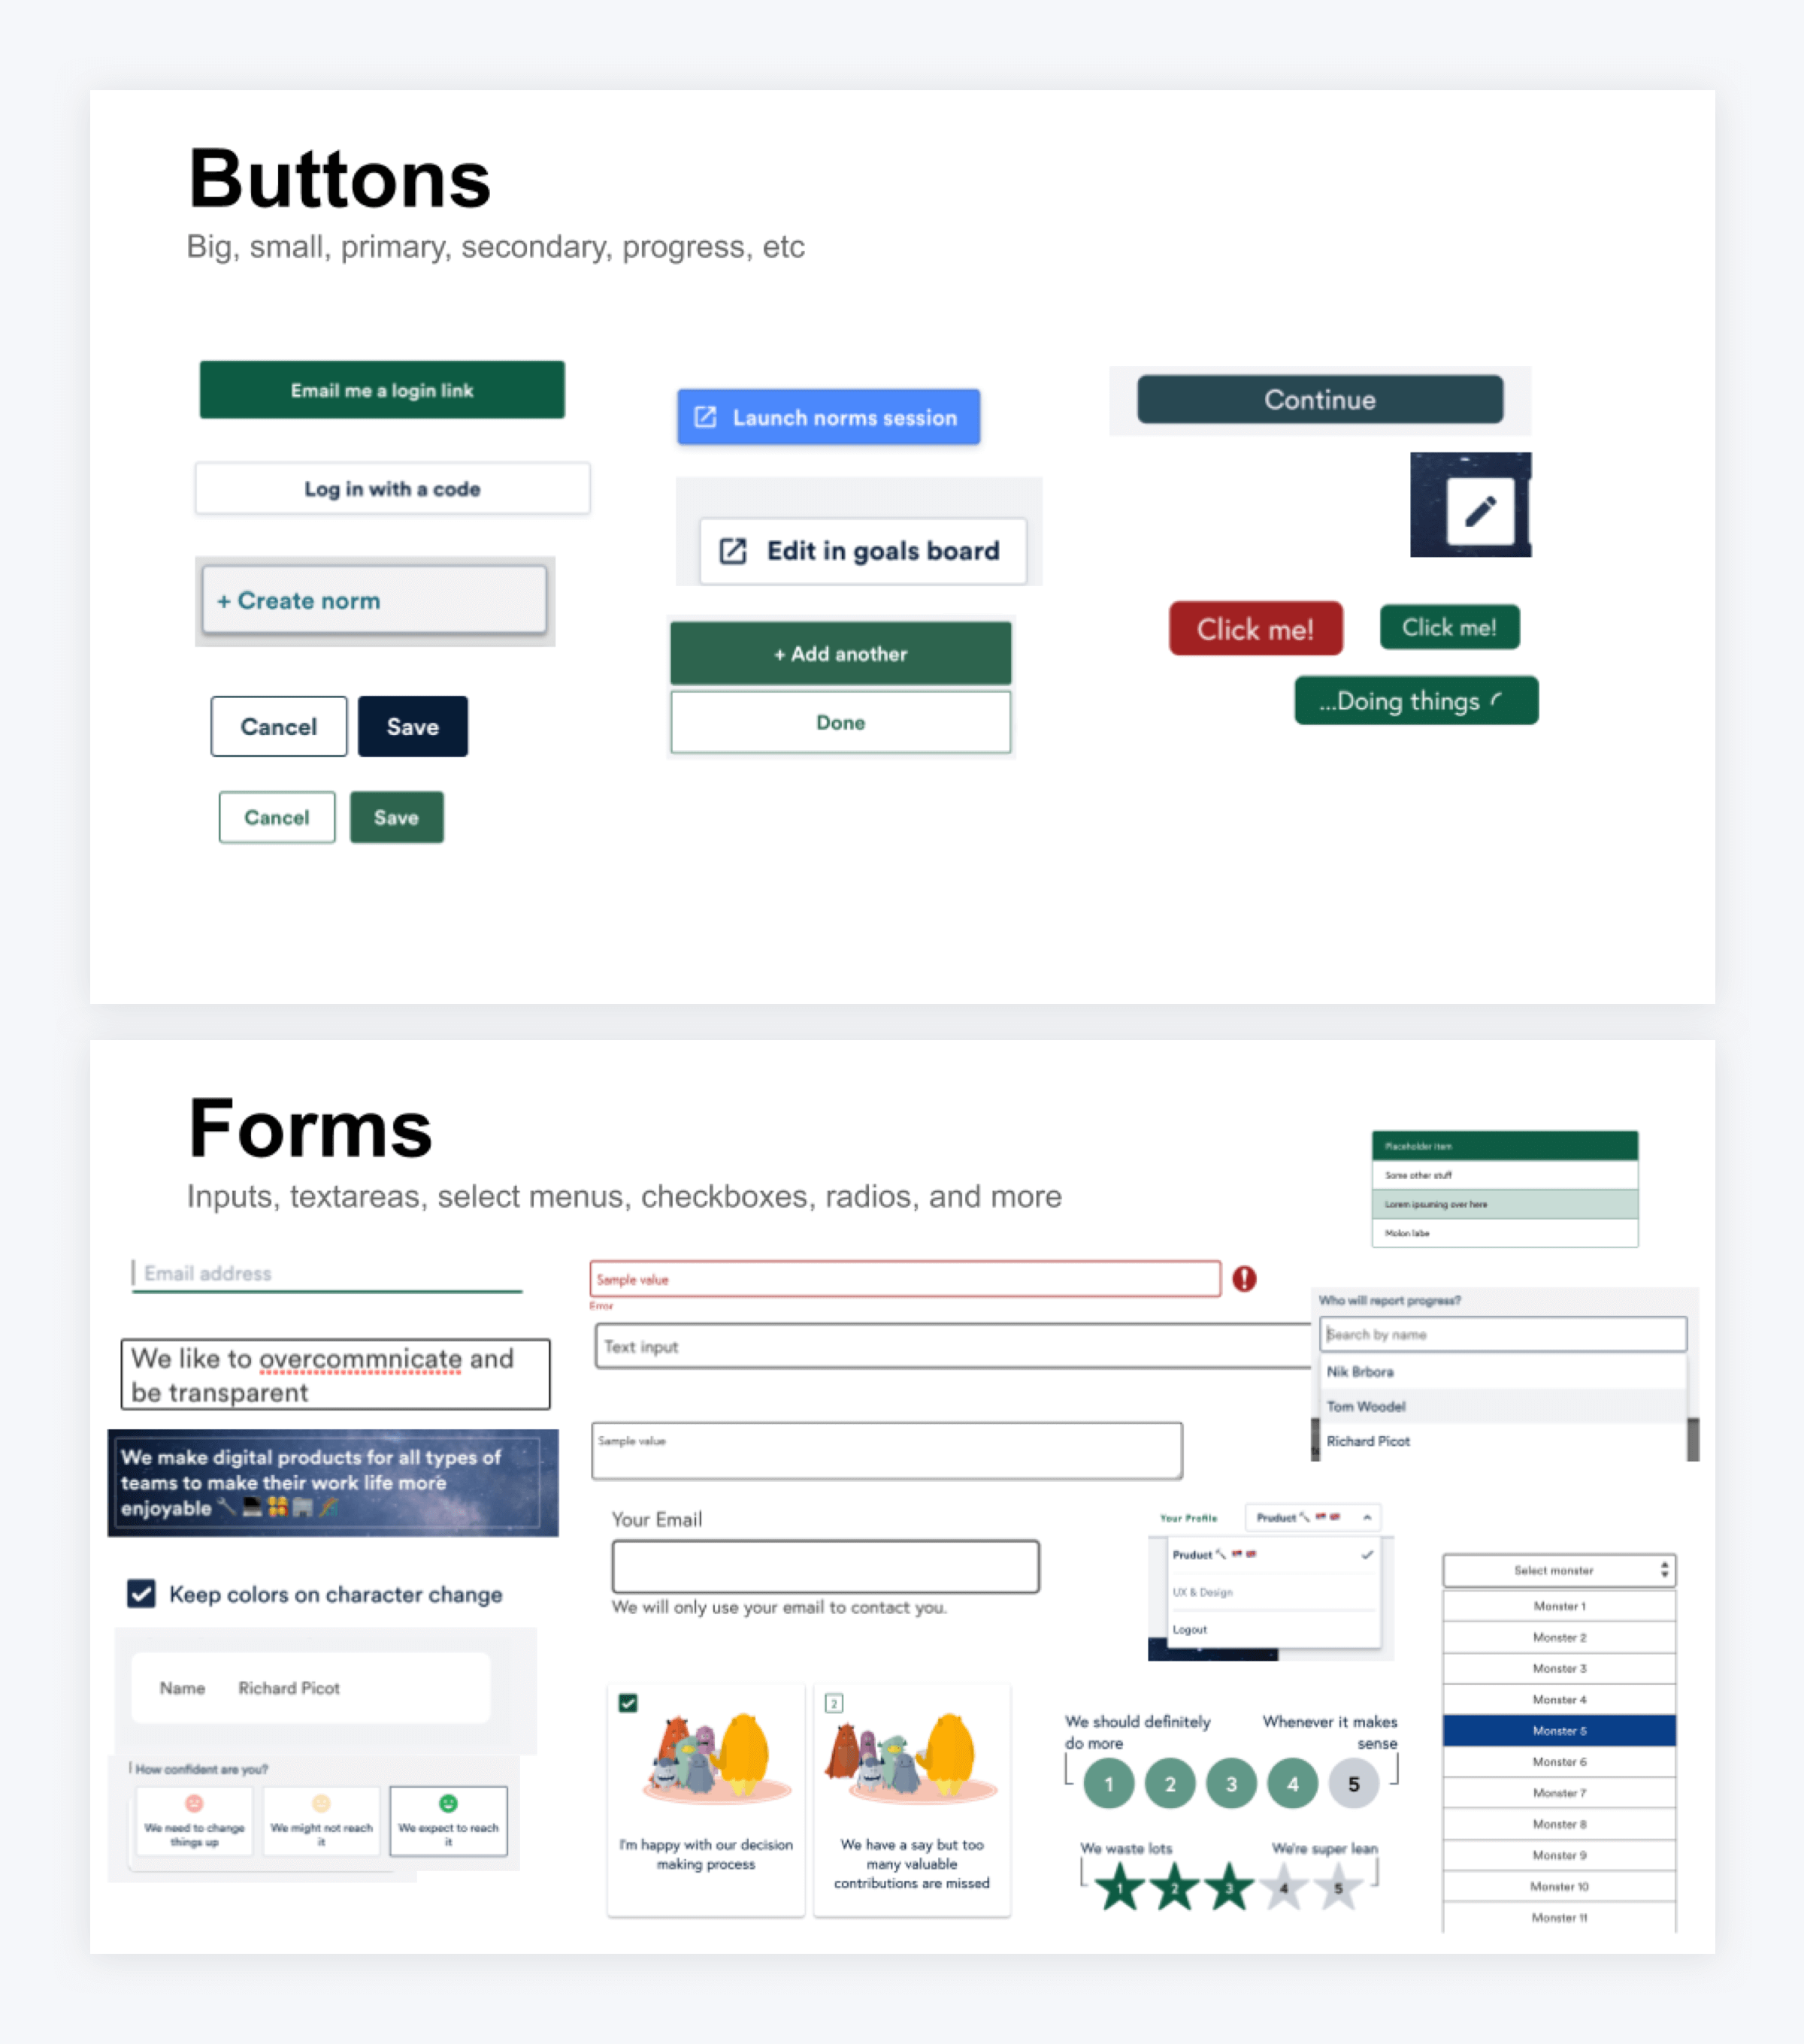 Variations of buttons and form elements